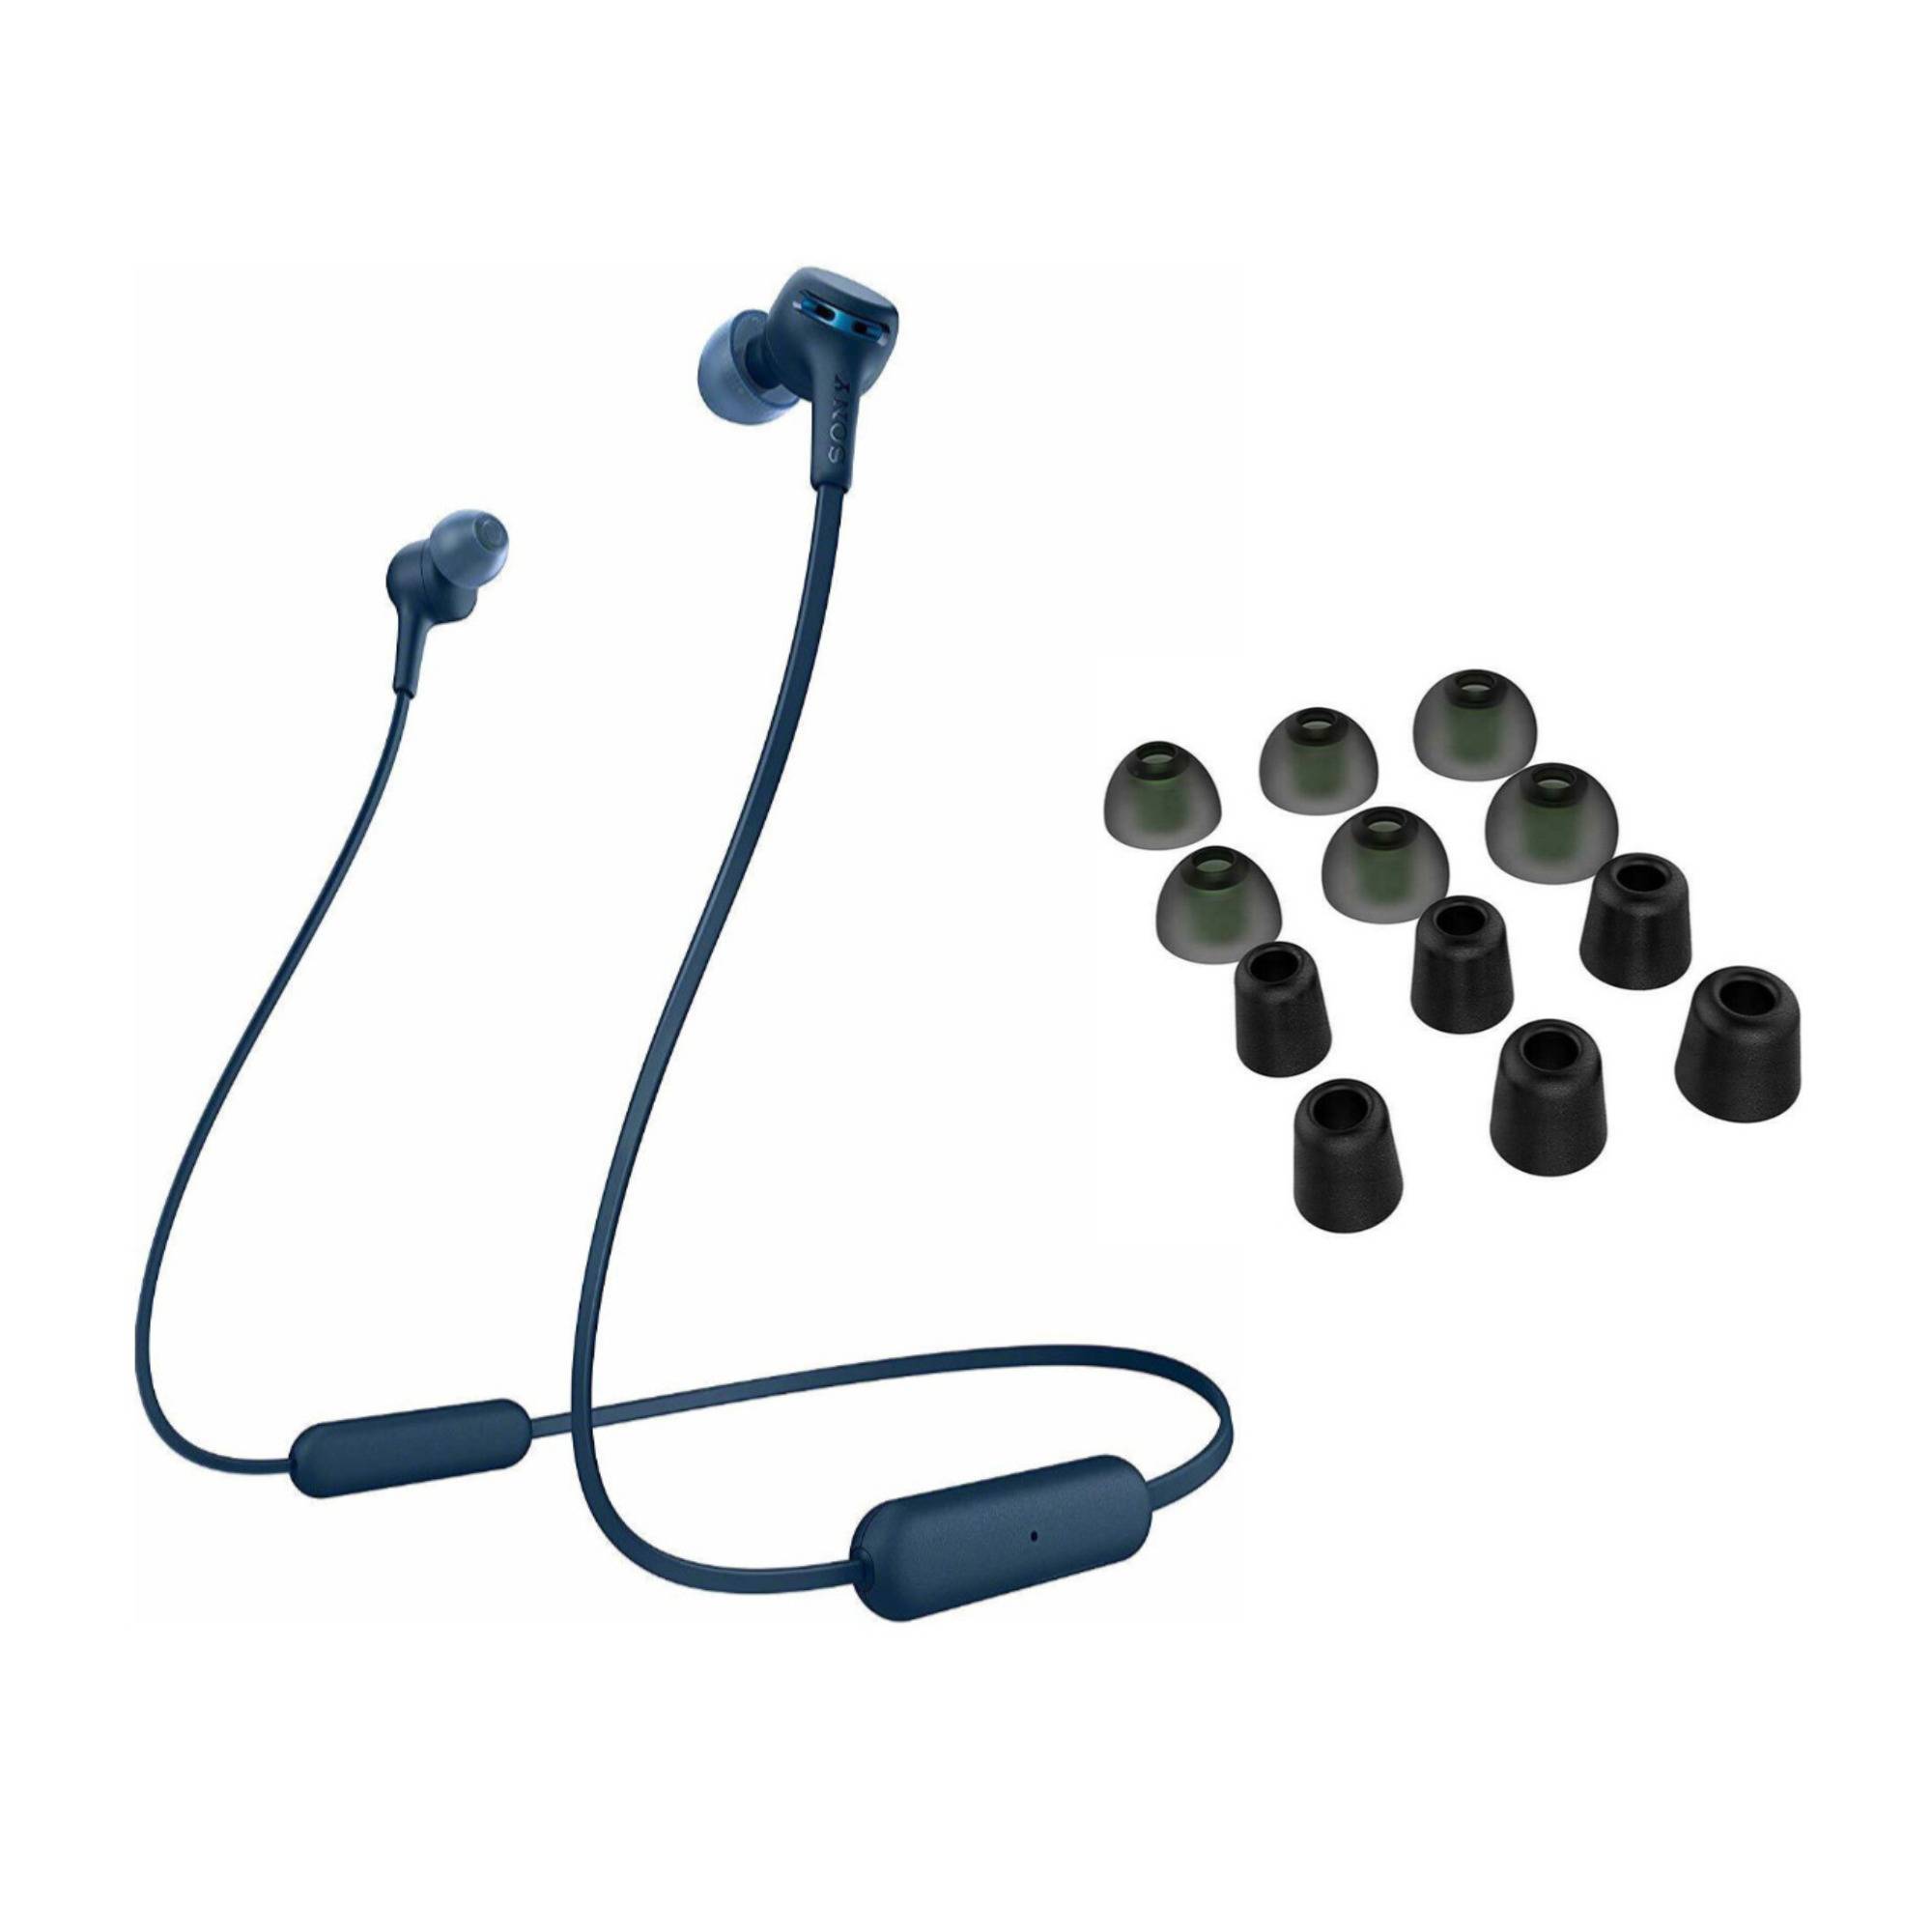 Sony WI-XB400 Extra Bass Wireless In-Ear Headphones (Blue) with Knox Noise Isolating Memory Foam and Silicone Ear Tips